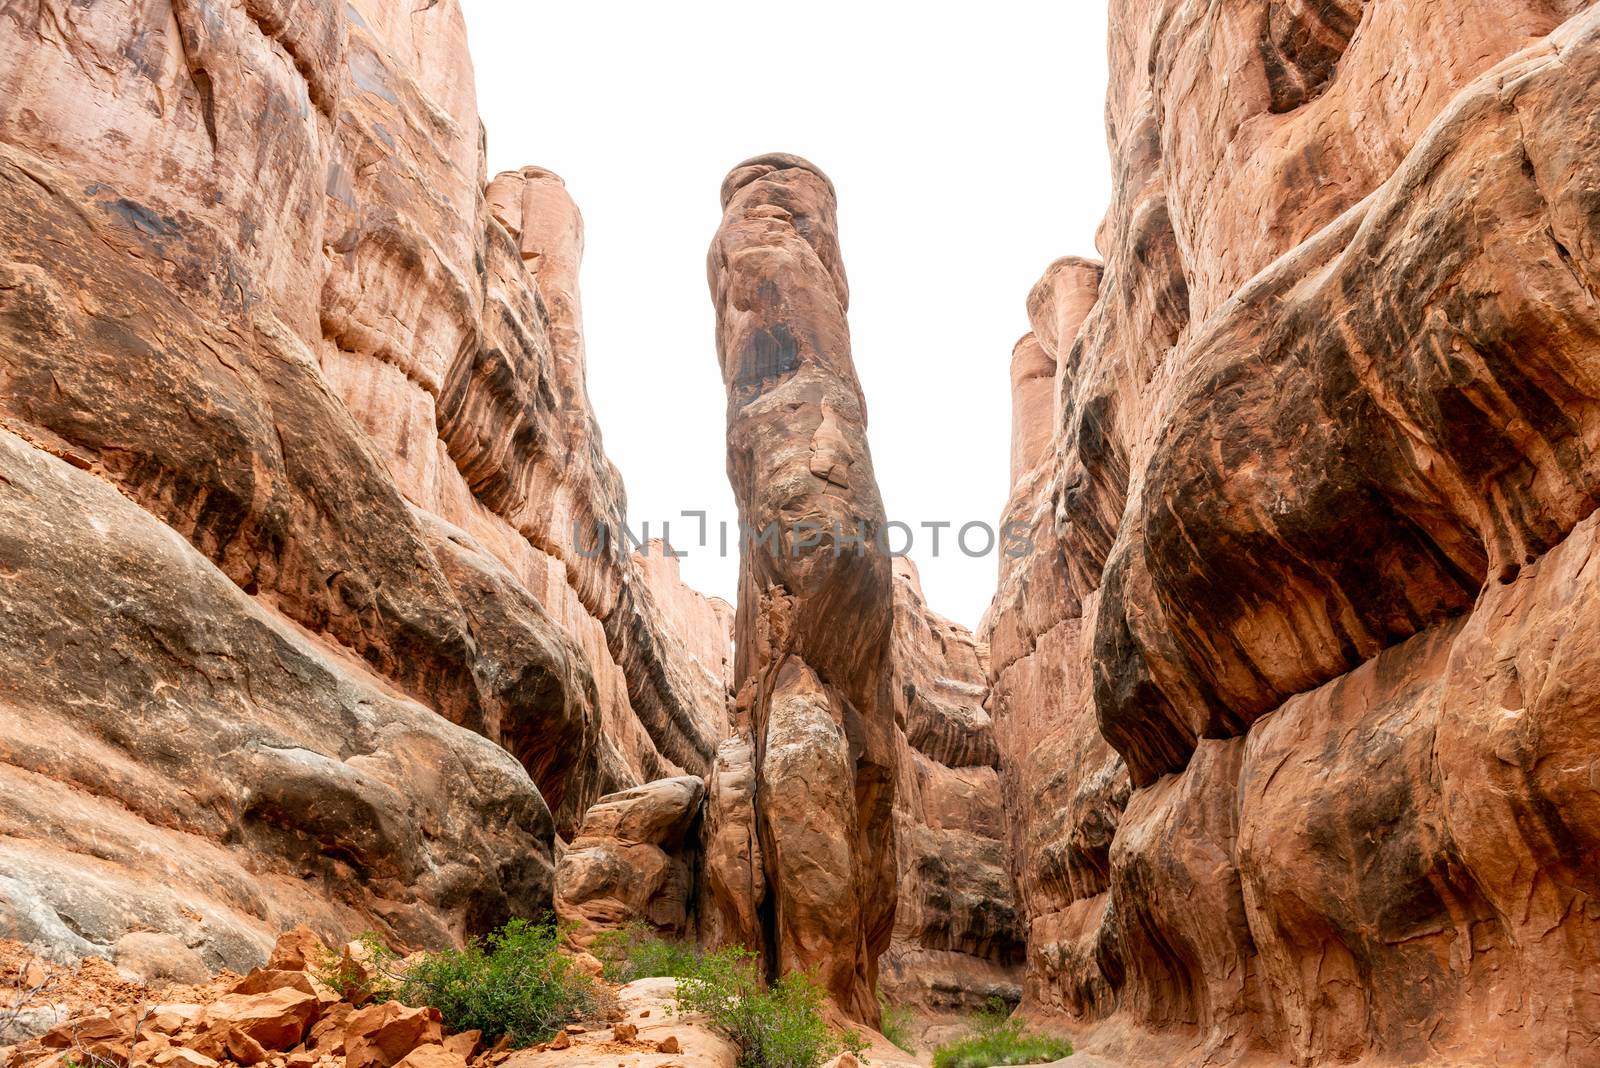 Sandstone formations in Fiery Furnace, Arches National Park, Utah by Njean